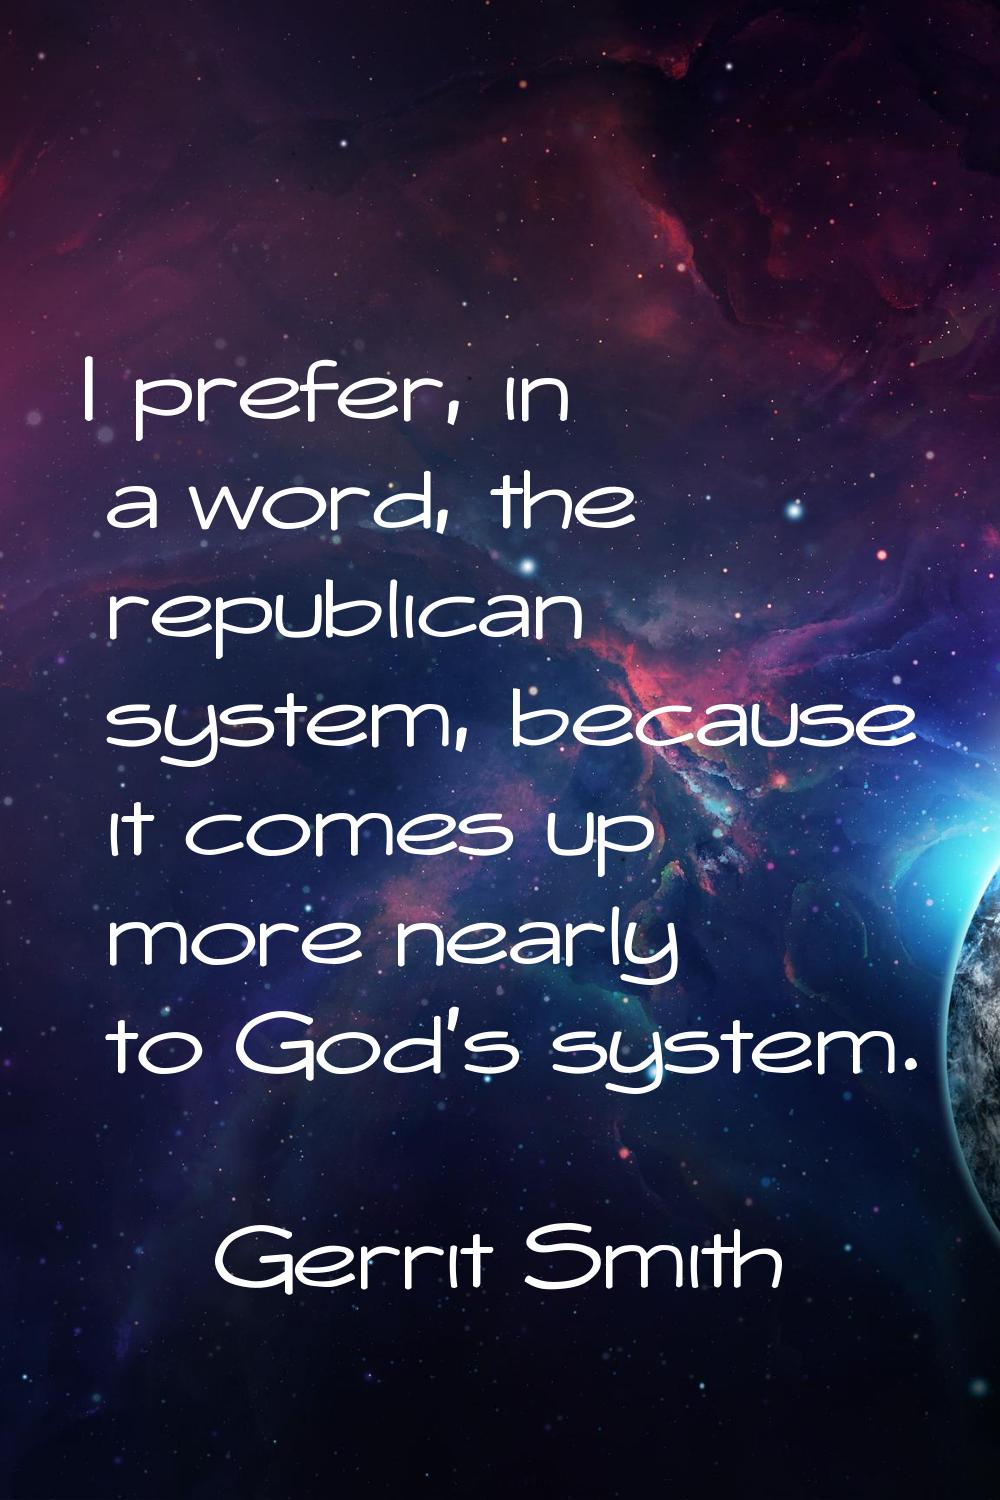 I prefer, in a word, the republican system, because it comes up more nearly to God's system.